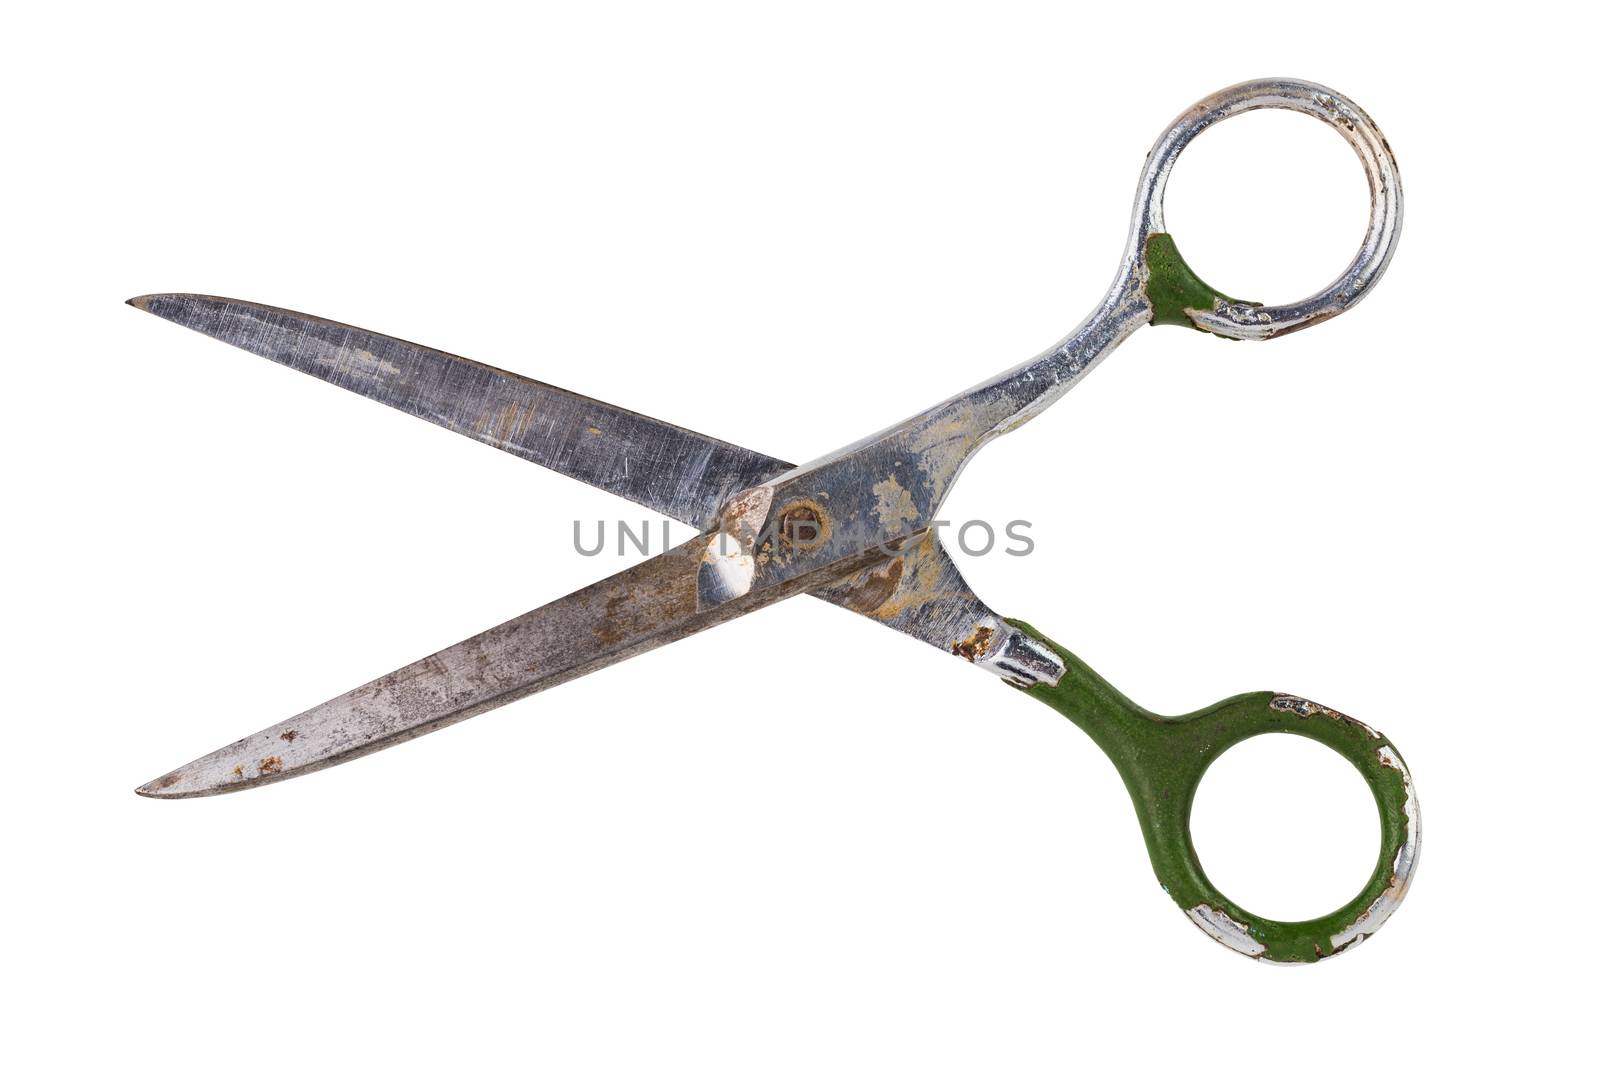 Single old soviet dirty used scissors isolated on white background. Opened.